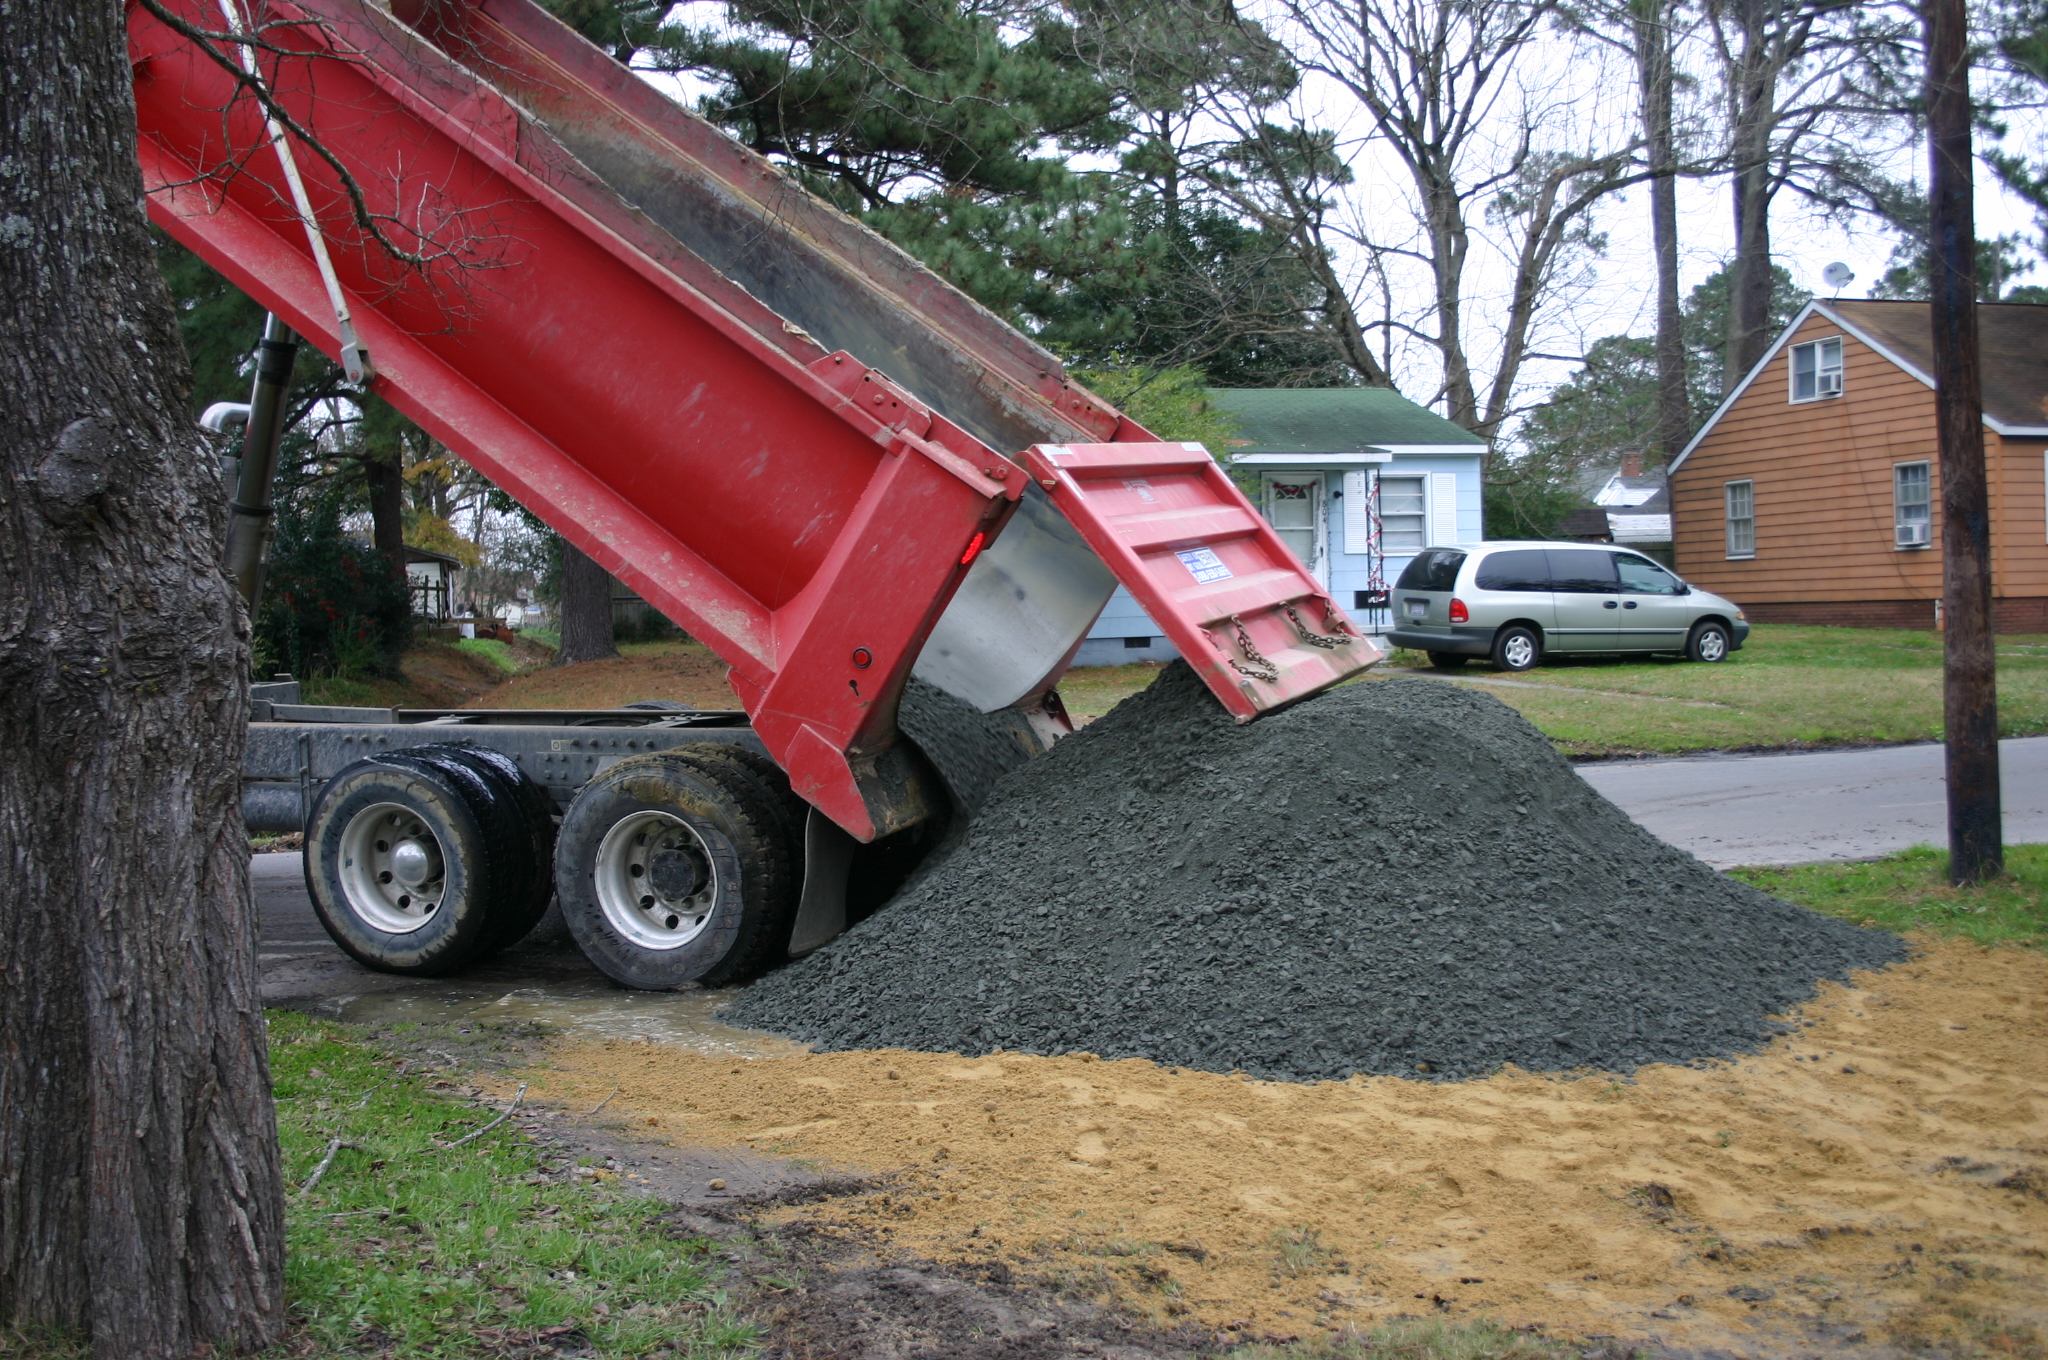 Gravel is a cheap and eco-friendly driveway option, and it's quick and easy to build. (Credit: Flickr/Vicky Somma)